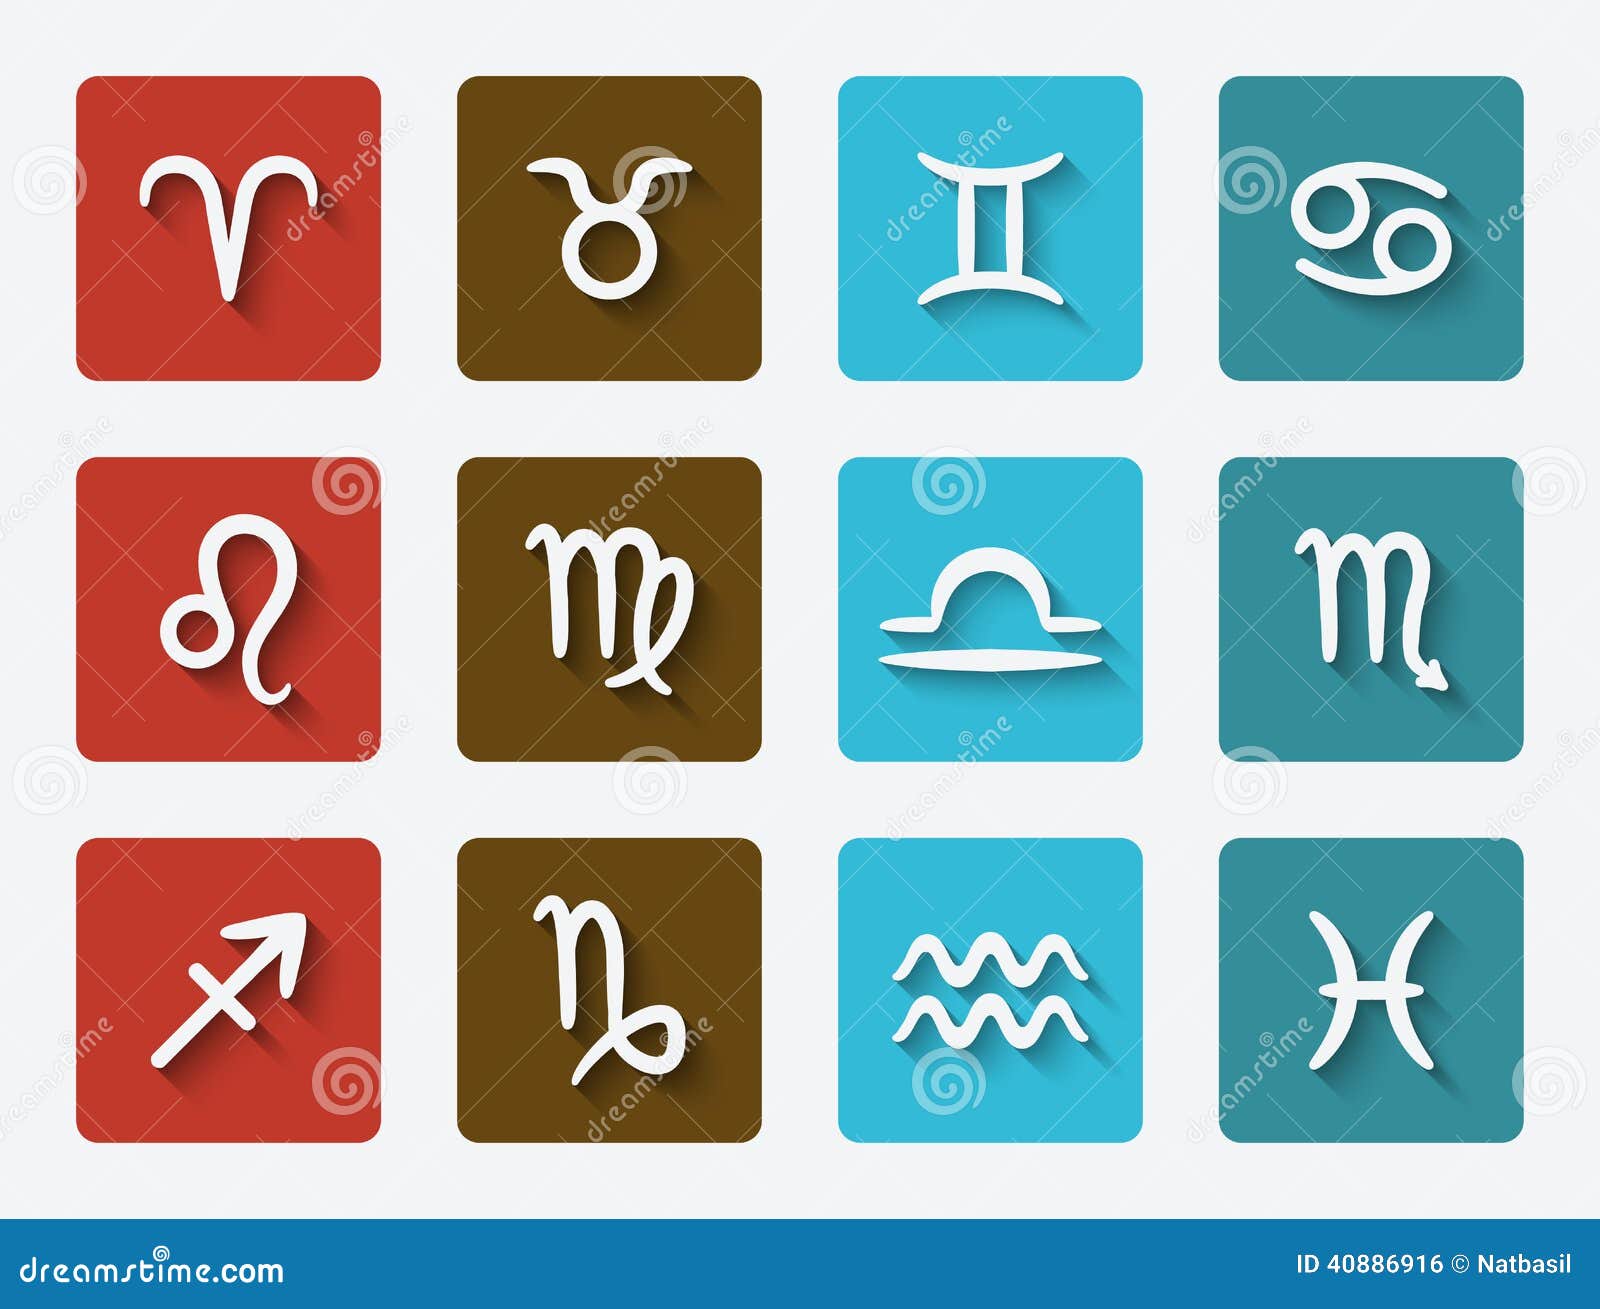 Astrological signs set stock vector. Illustration of signs - 40886916